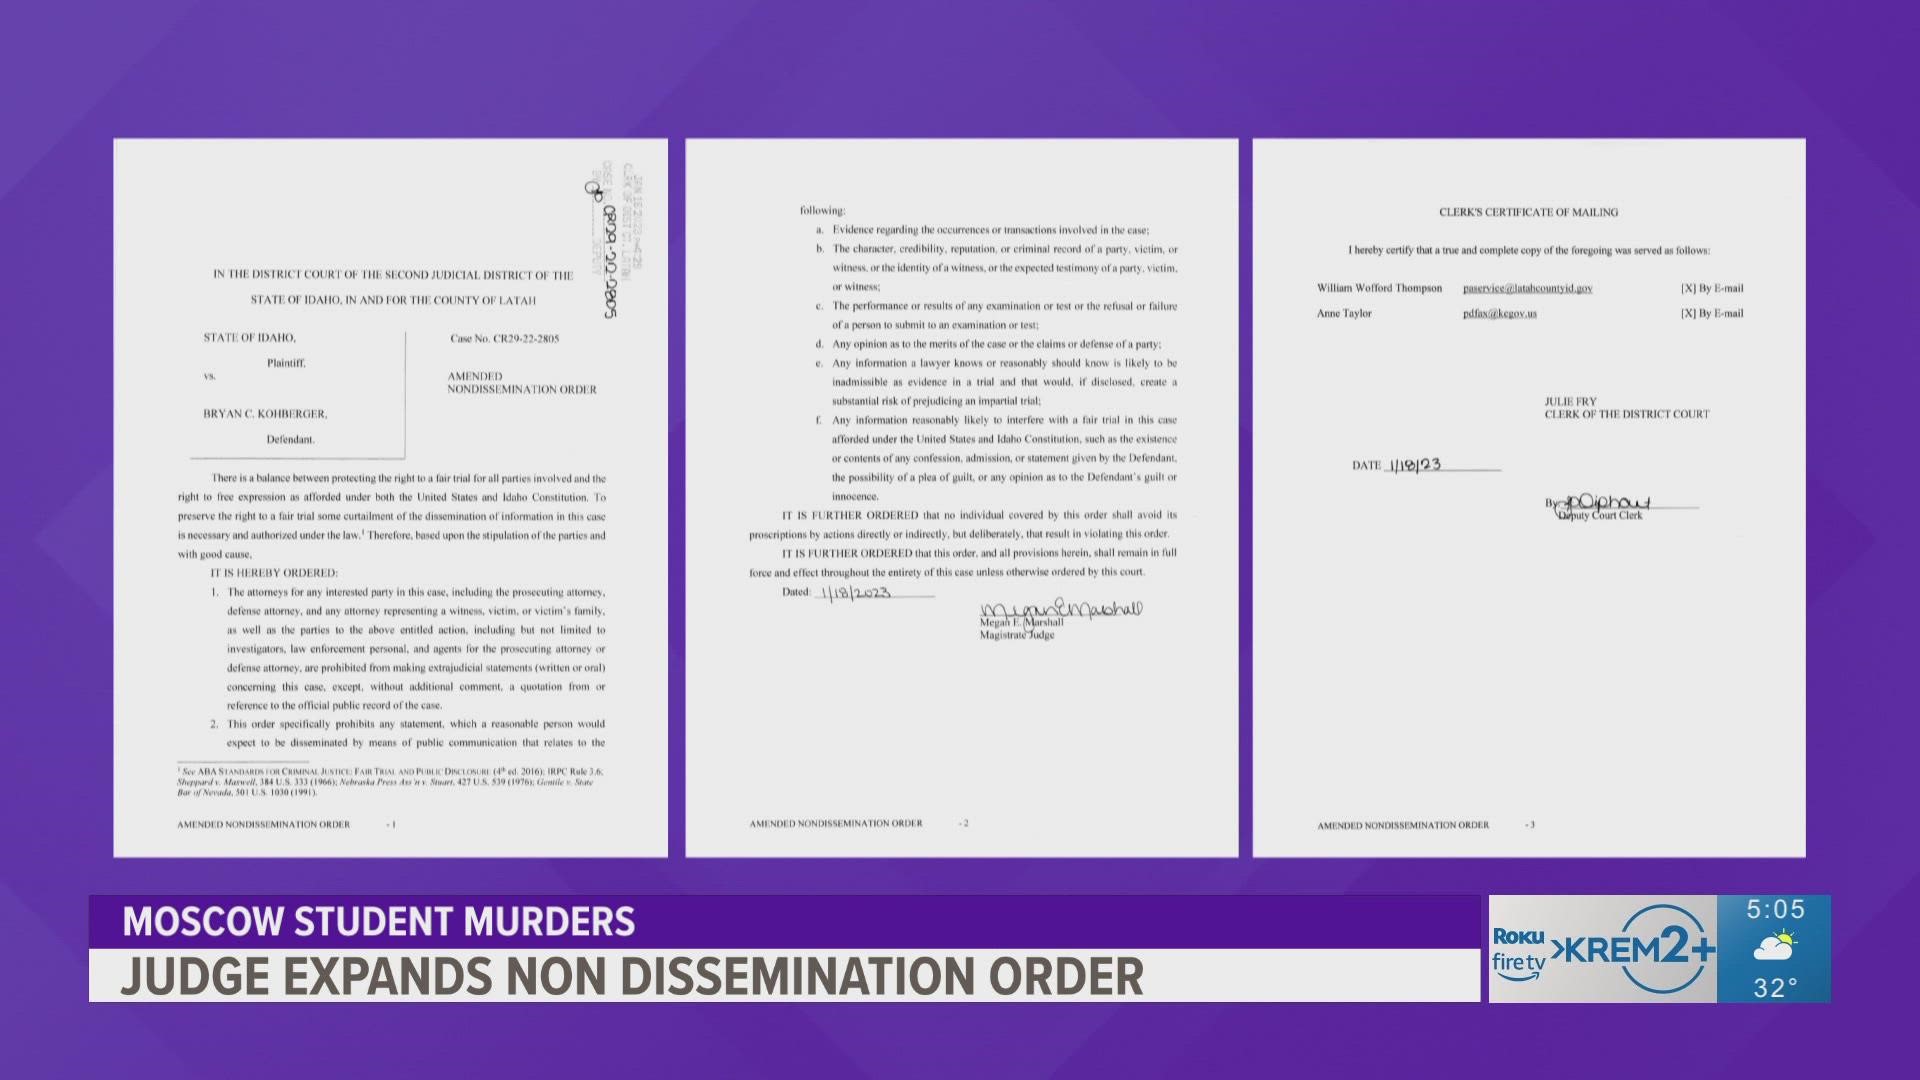 The updated order prohibits attorneys representing the victims' families from discussing the case publicly.